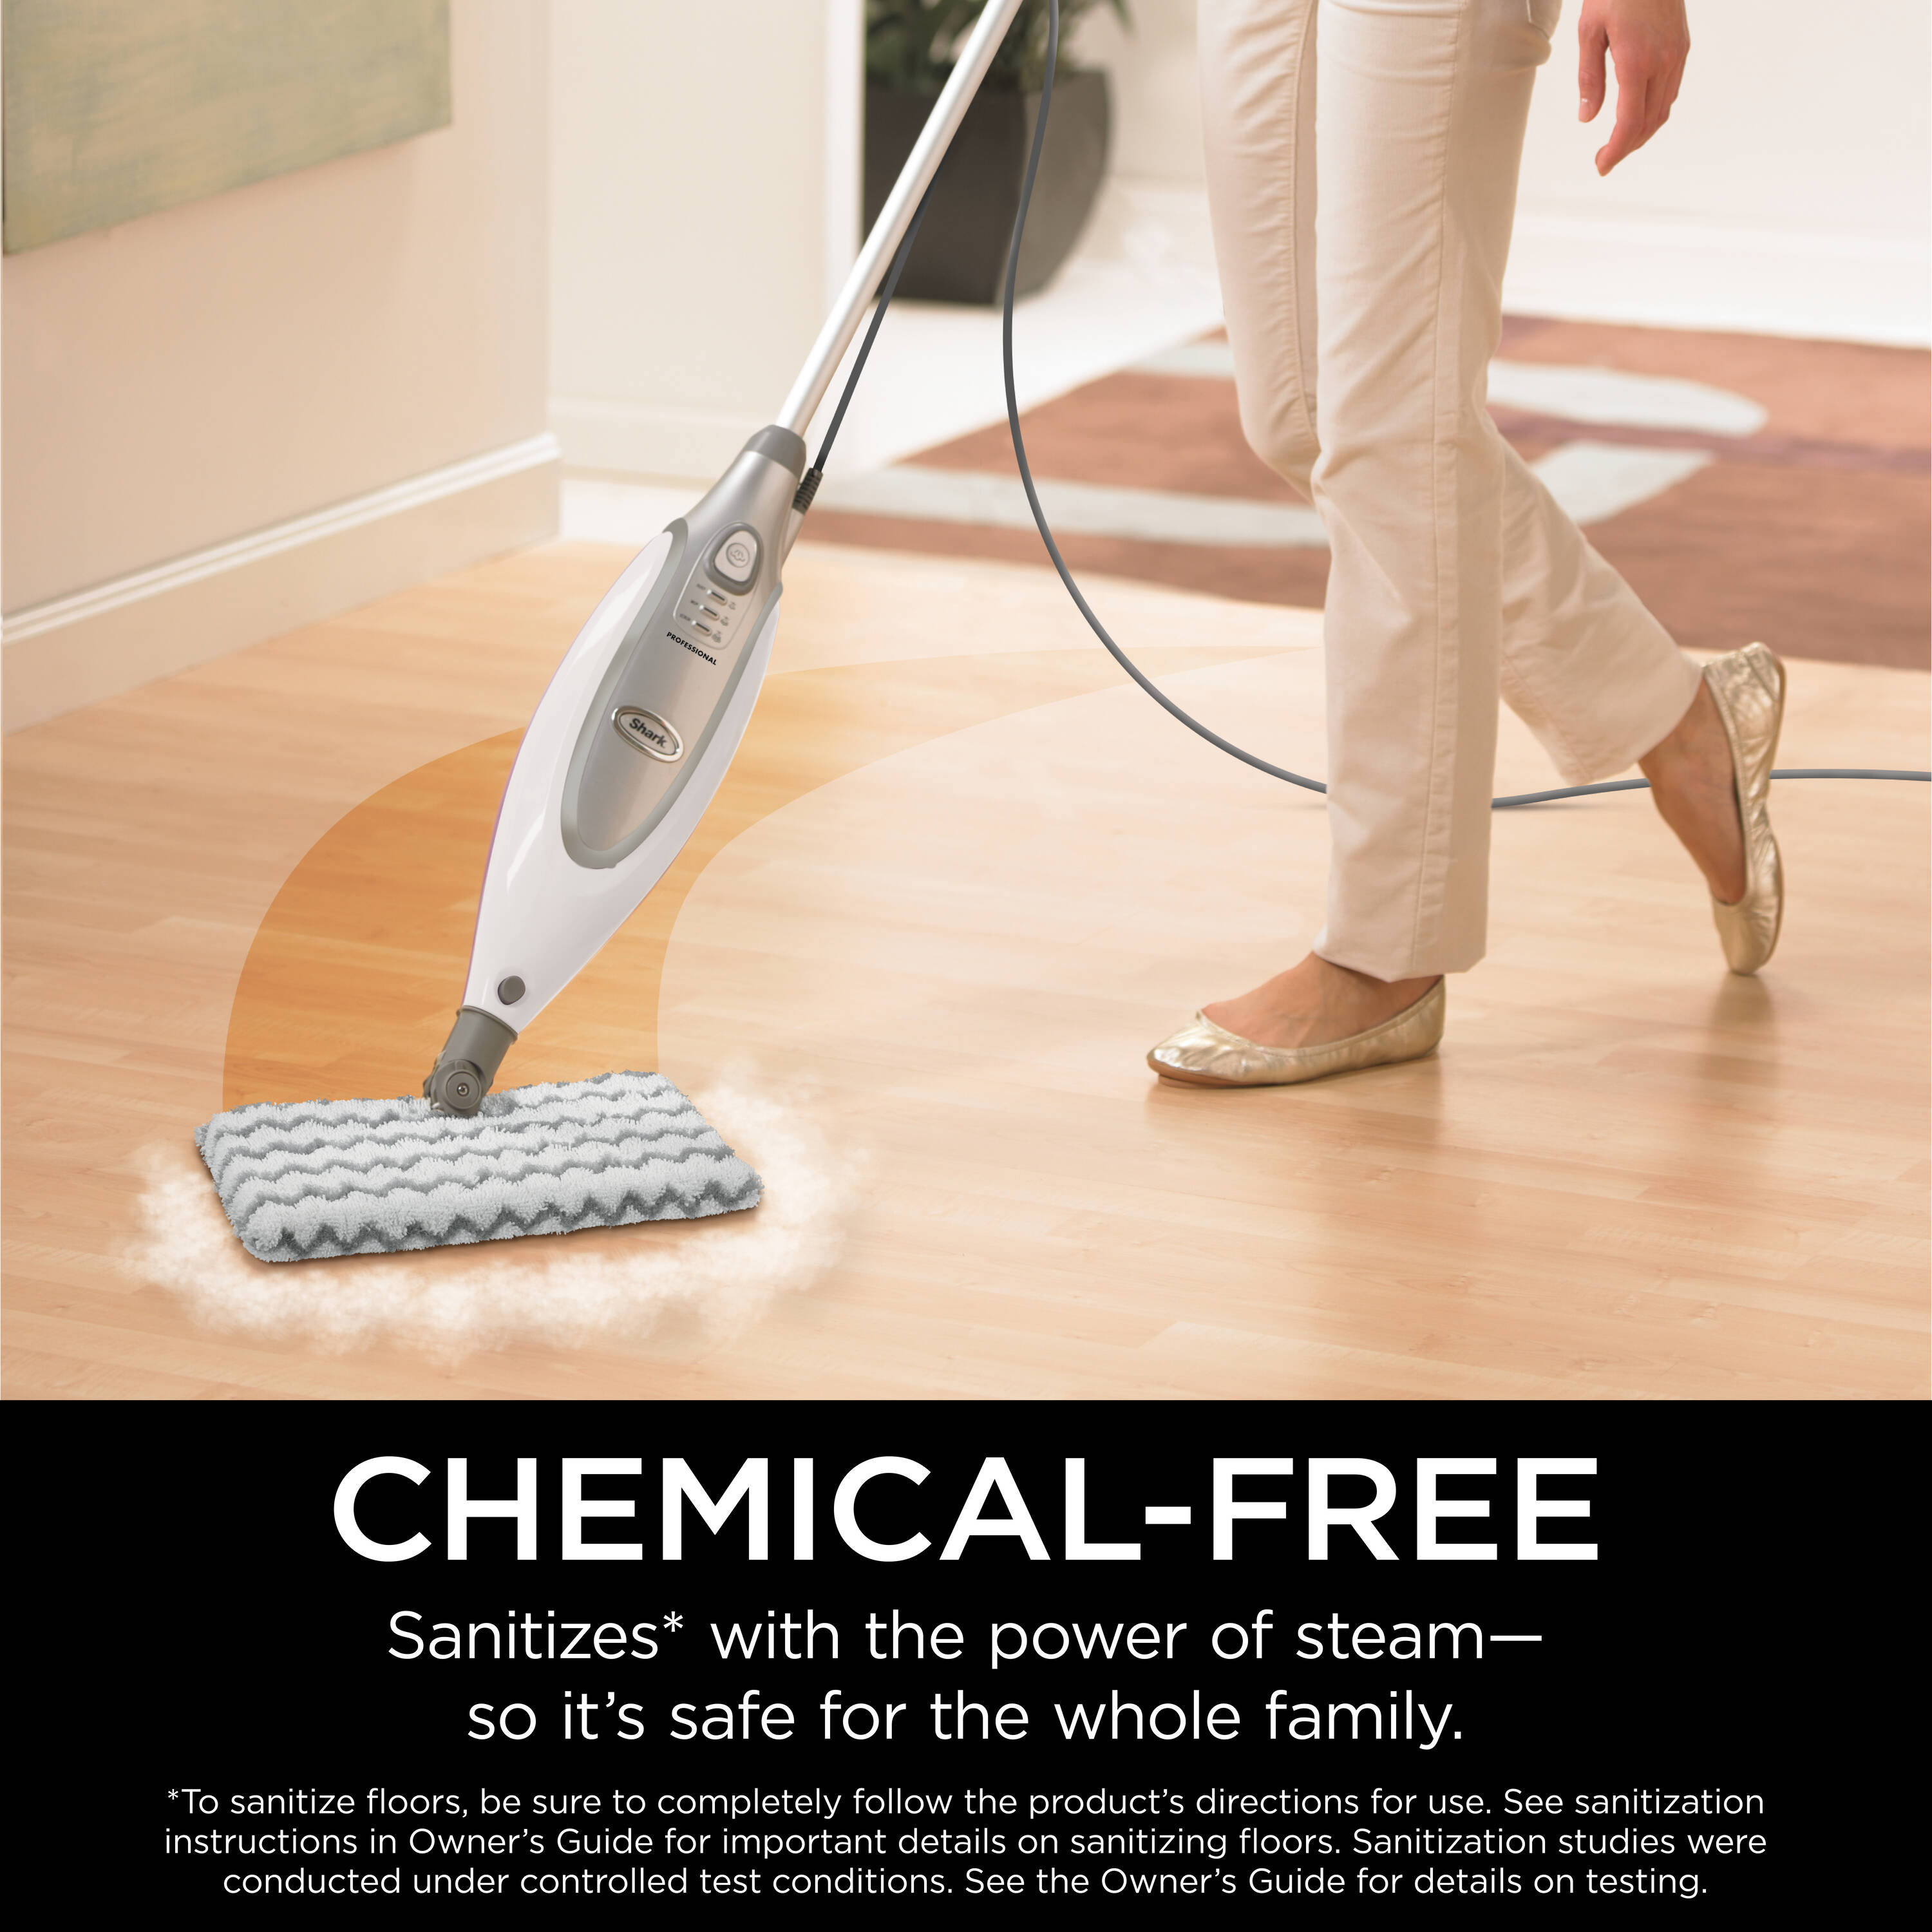 How to Use a Shark Steam Mop: Assembly & Cleaning Tips